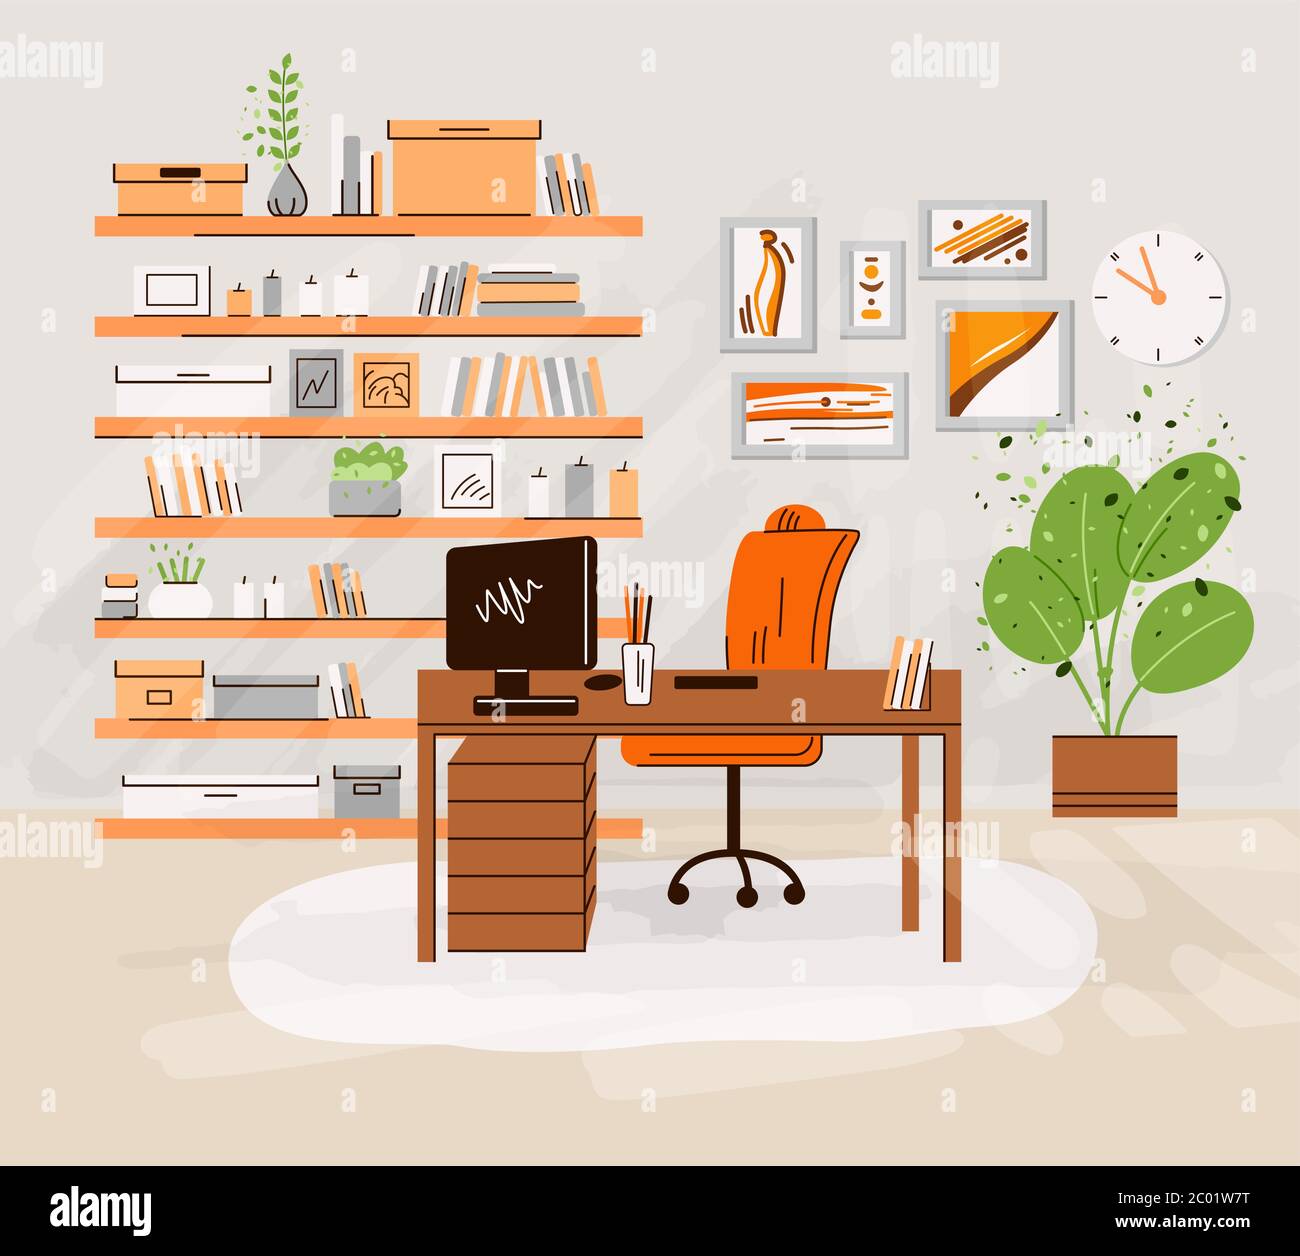 Vector flat illustration of home office work place interrior - working desk with monitor, computer, shelfs with books and accessories, plants. Cozy Stock Vector